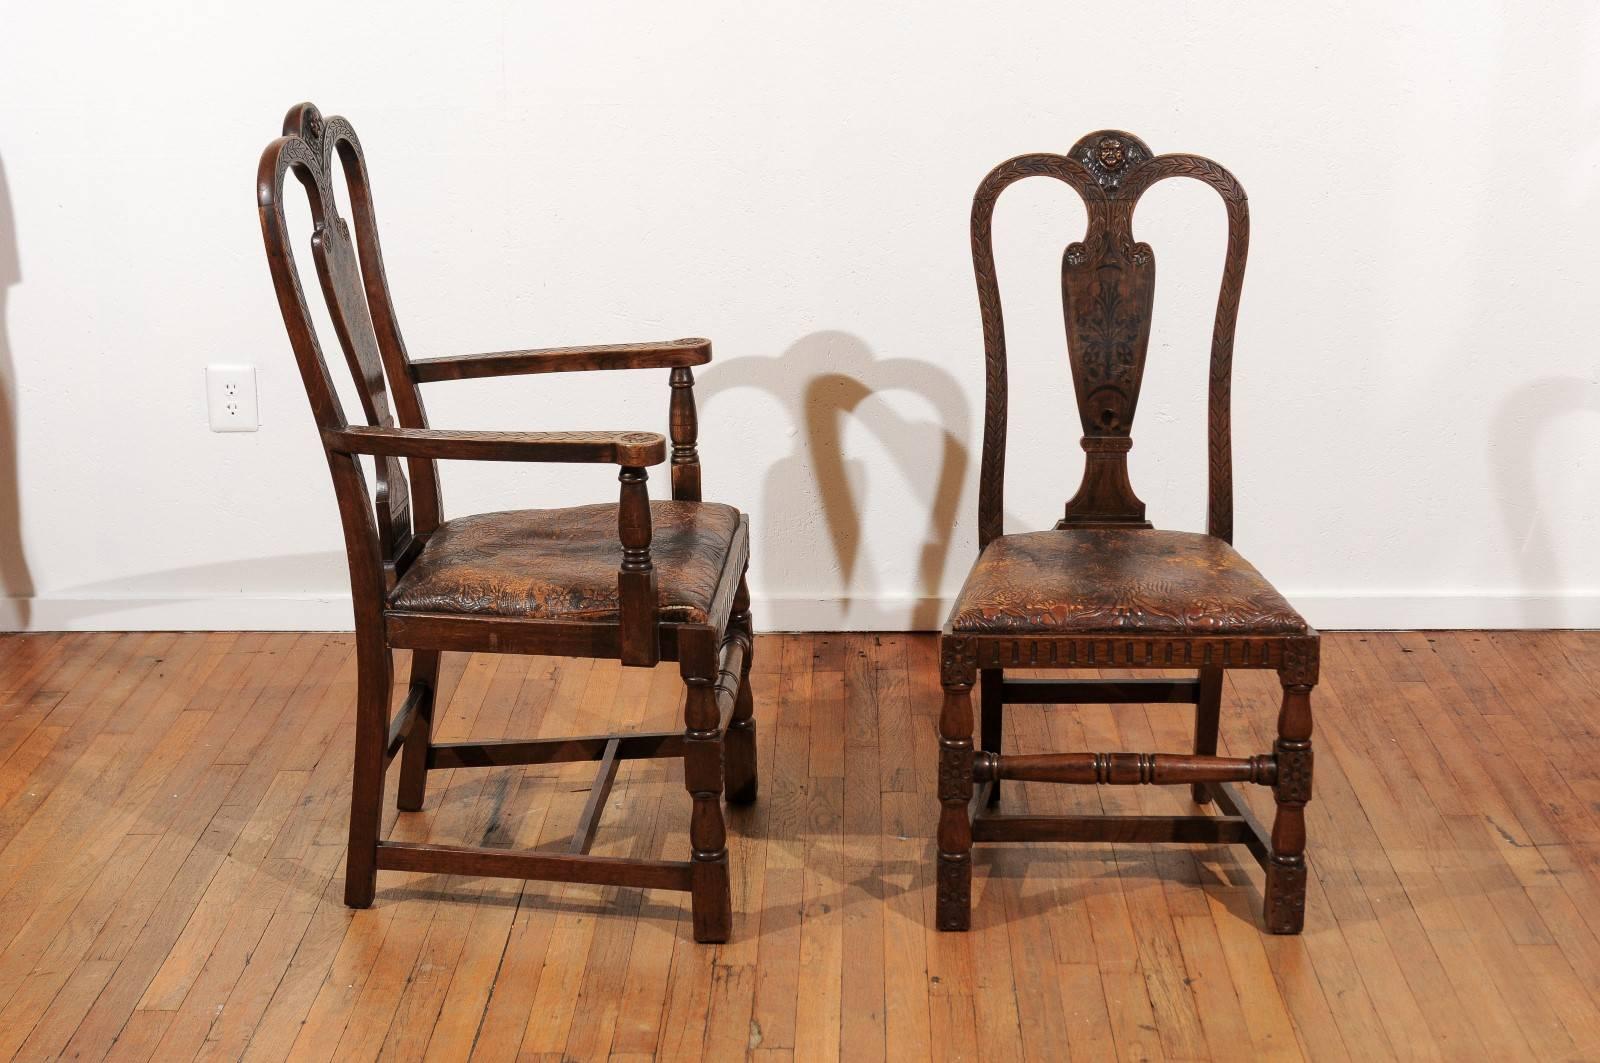 19th Century set of eight English dining chairs having two armchairs and six side chairs.  The chairs are made of solid oak with acanthus carved side and top rails surrounding a marquetry inlaid backsplat and crowned by a carved cherub.  The chairs